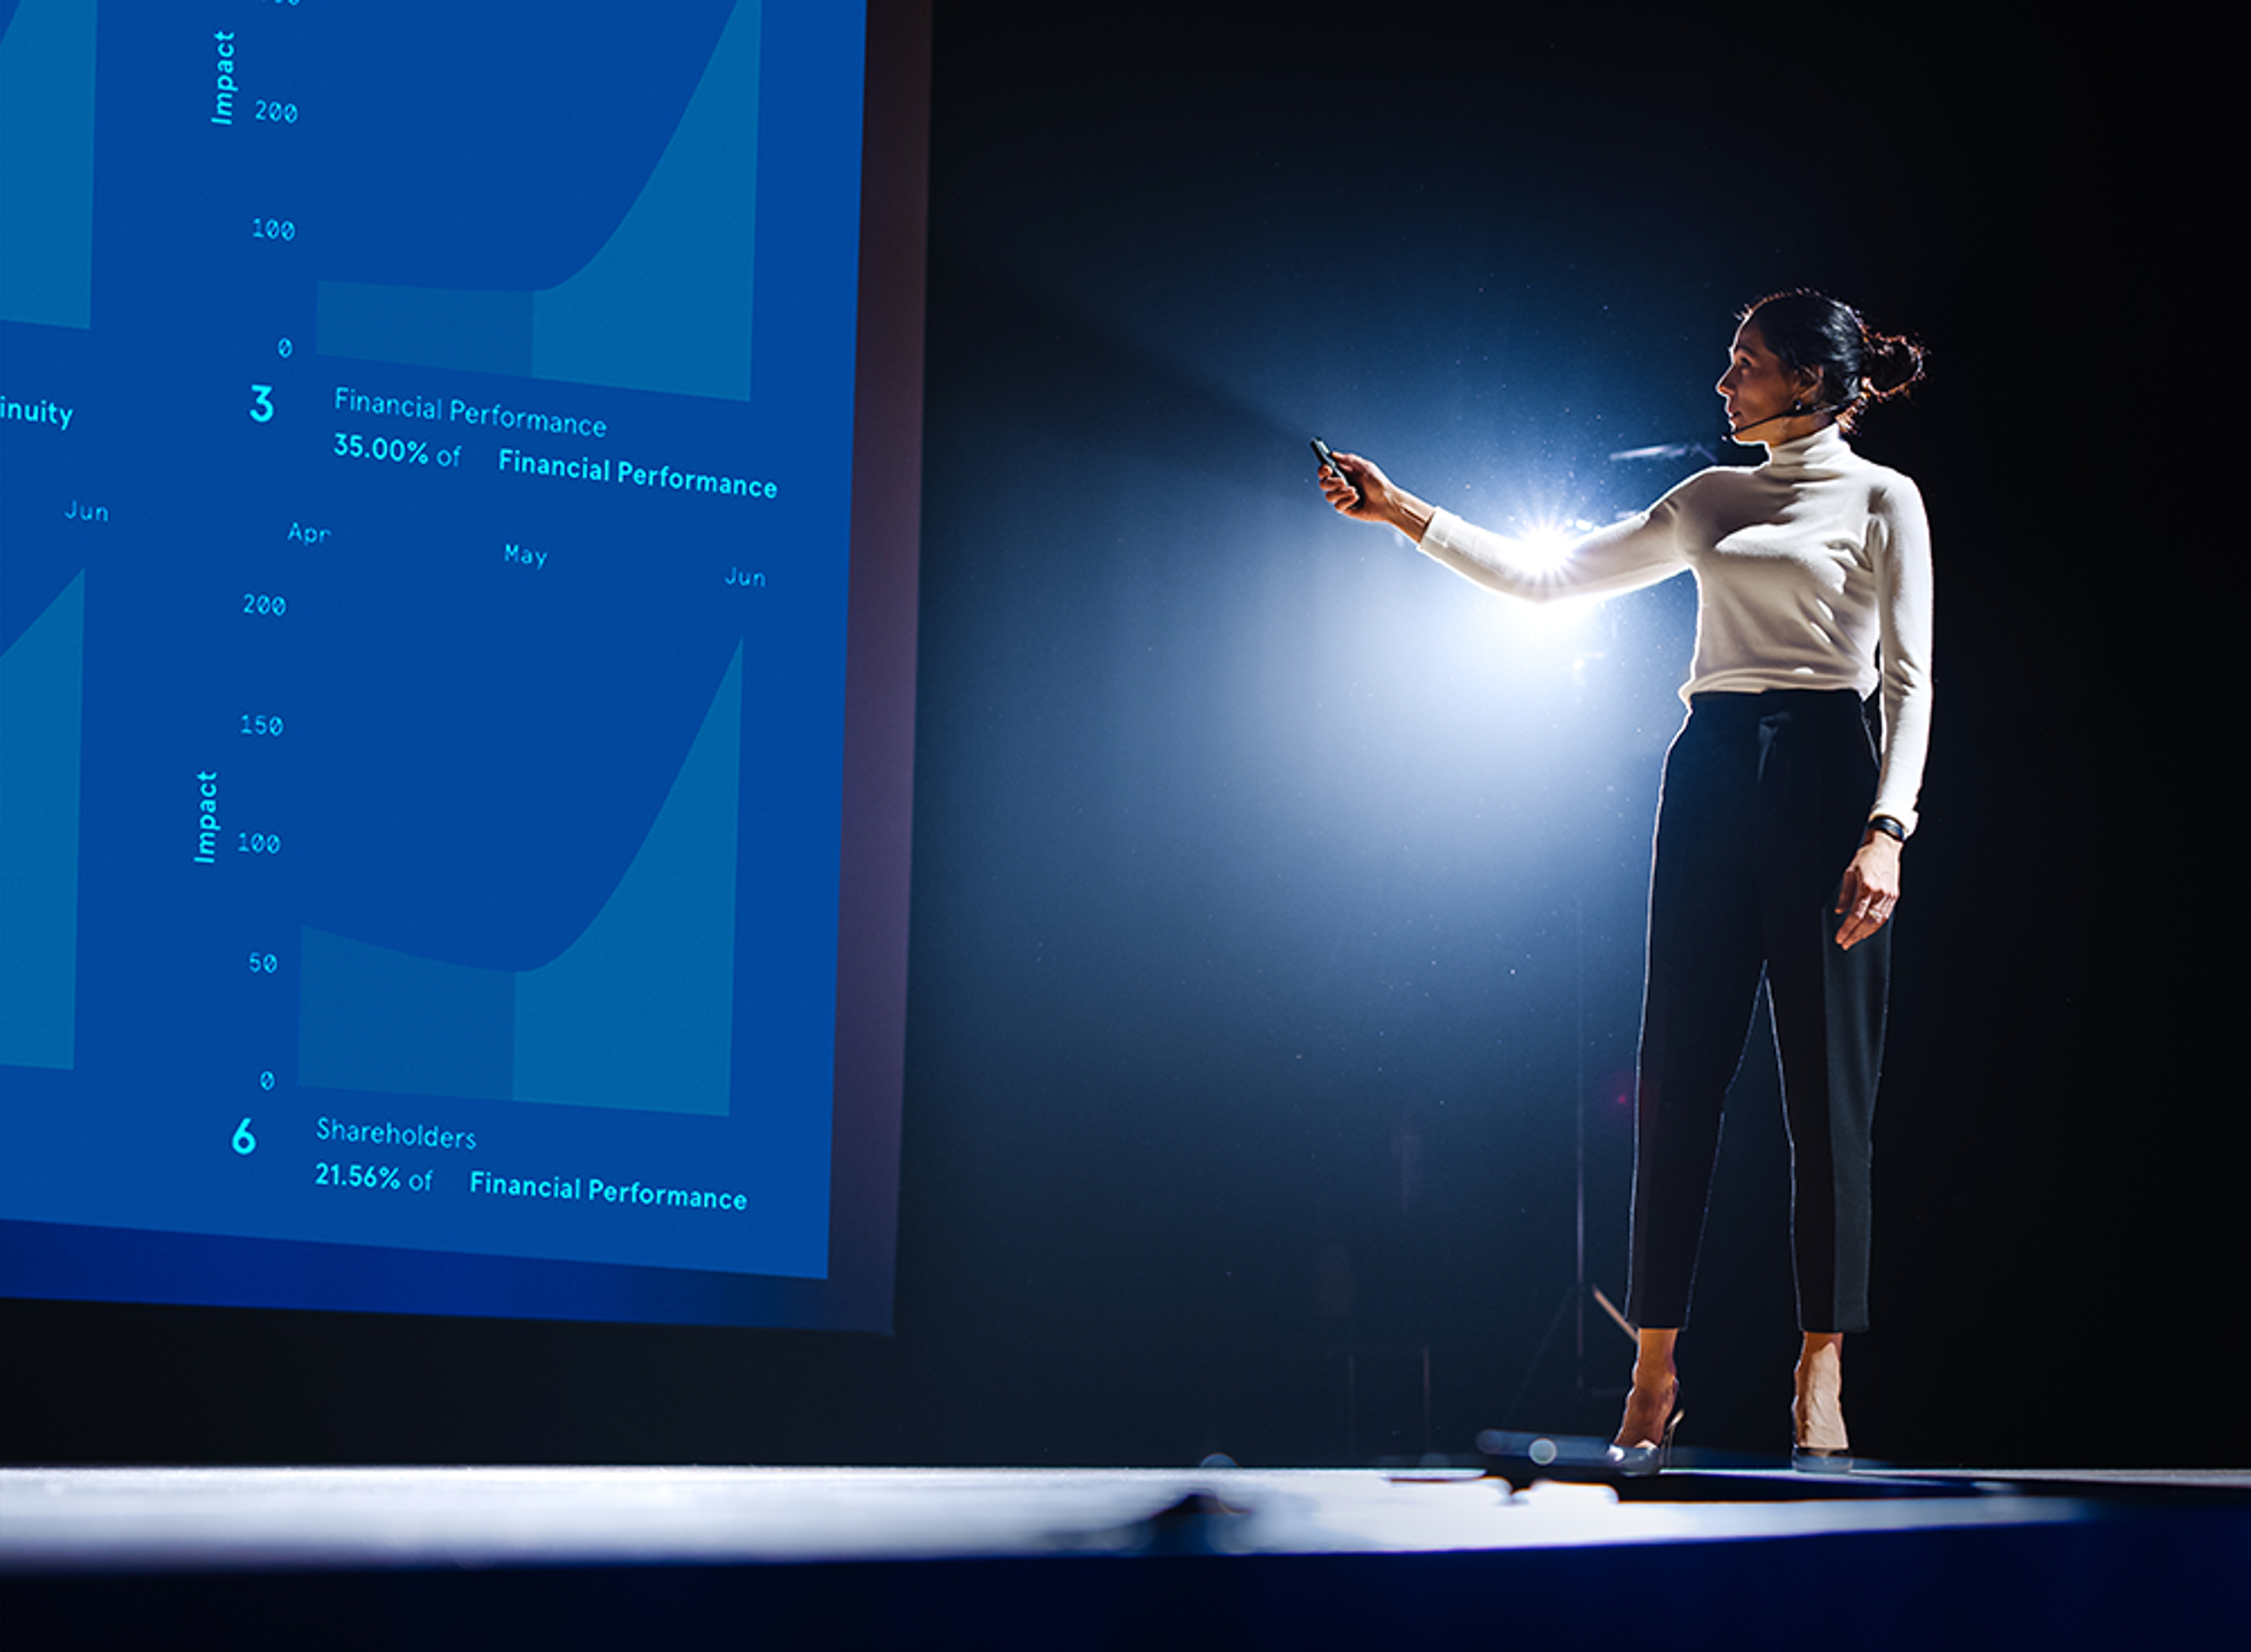 A photo of someone giving a keynote presentation on stage